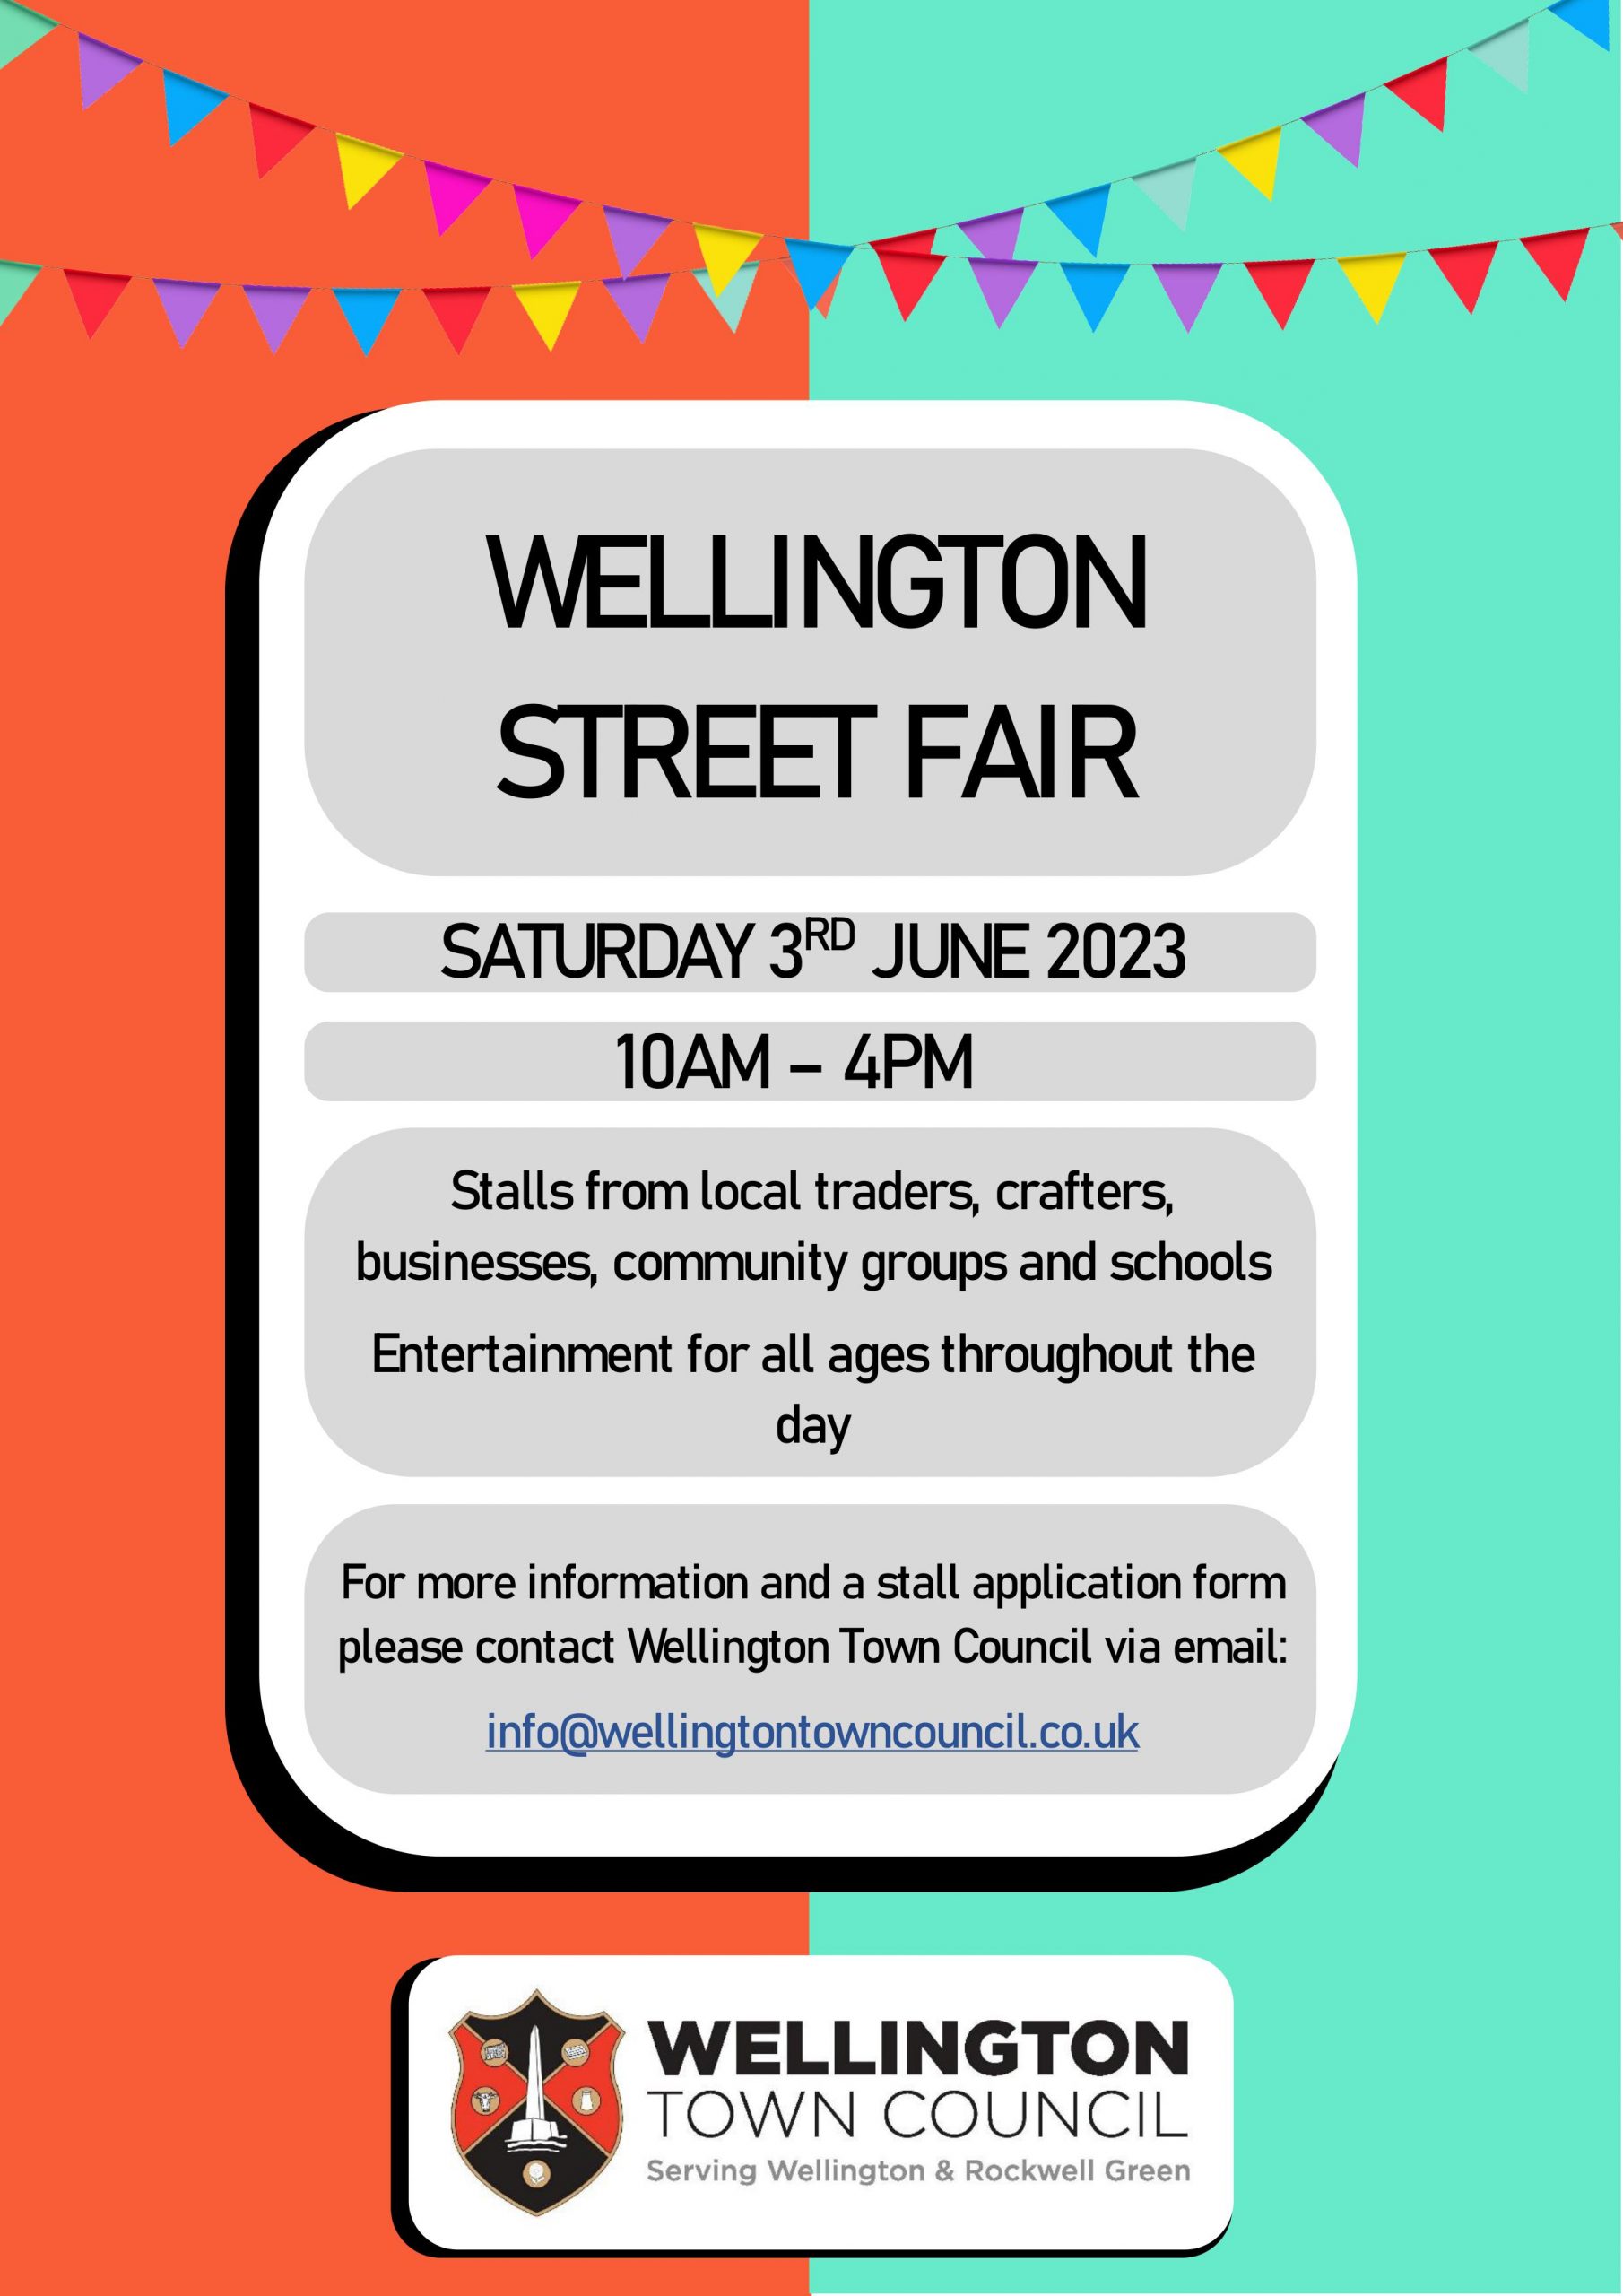 Wellington Street Fair, Saturday 3rd June 2023, 10am - 4pm, Stalls from local traders, crafters, businesses, community groups and schools Entertainment for all ages throughout the day. For more information and a stall application form please contact Wellington Town Council via email: info@wellingtontowncouncil.co.uk